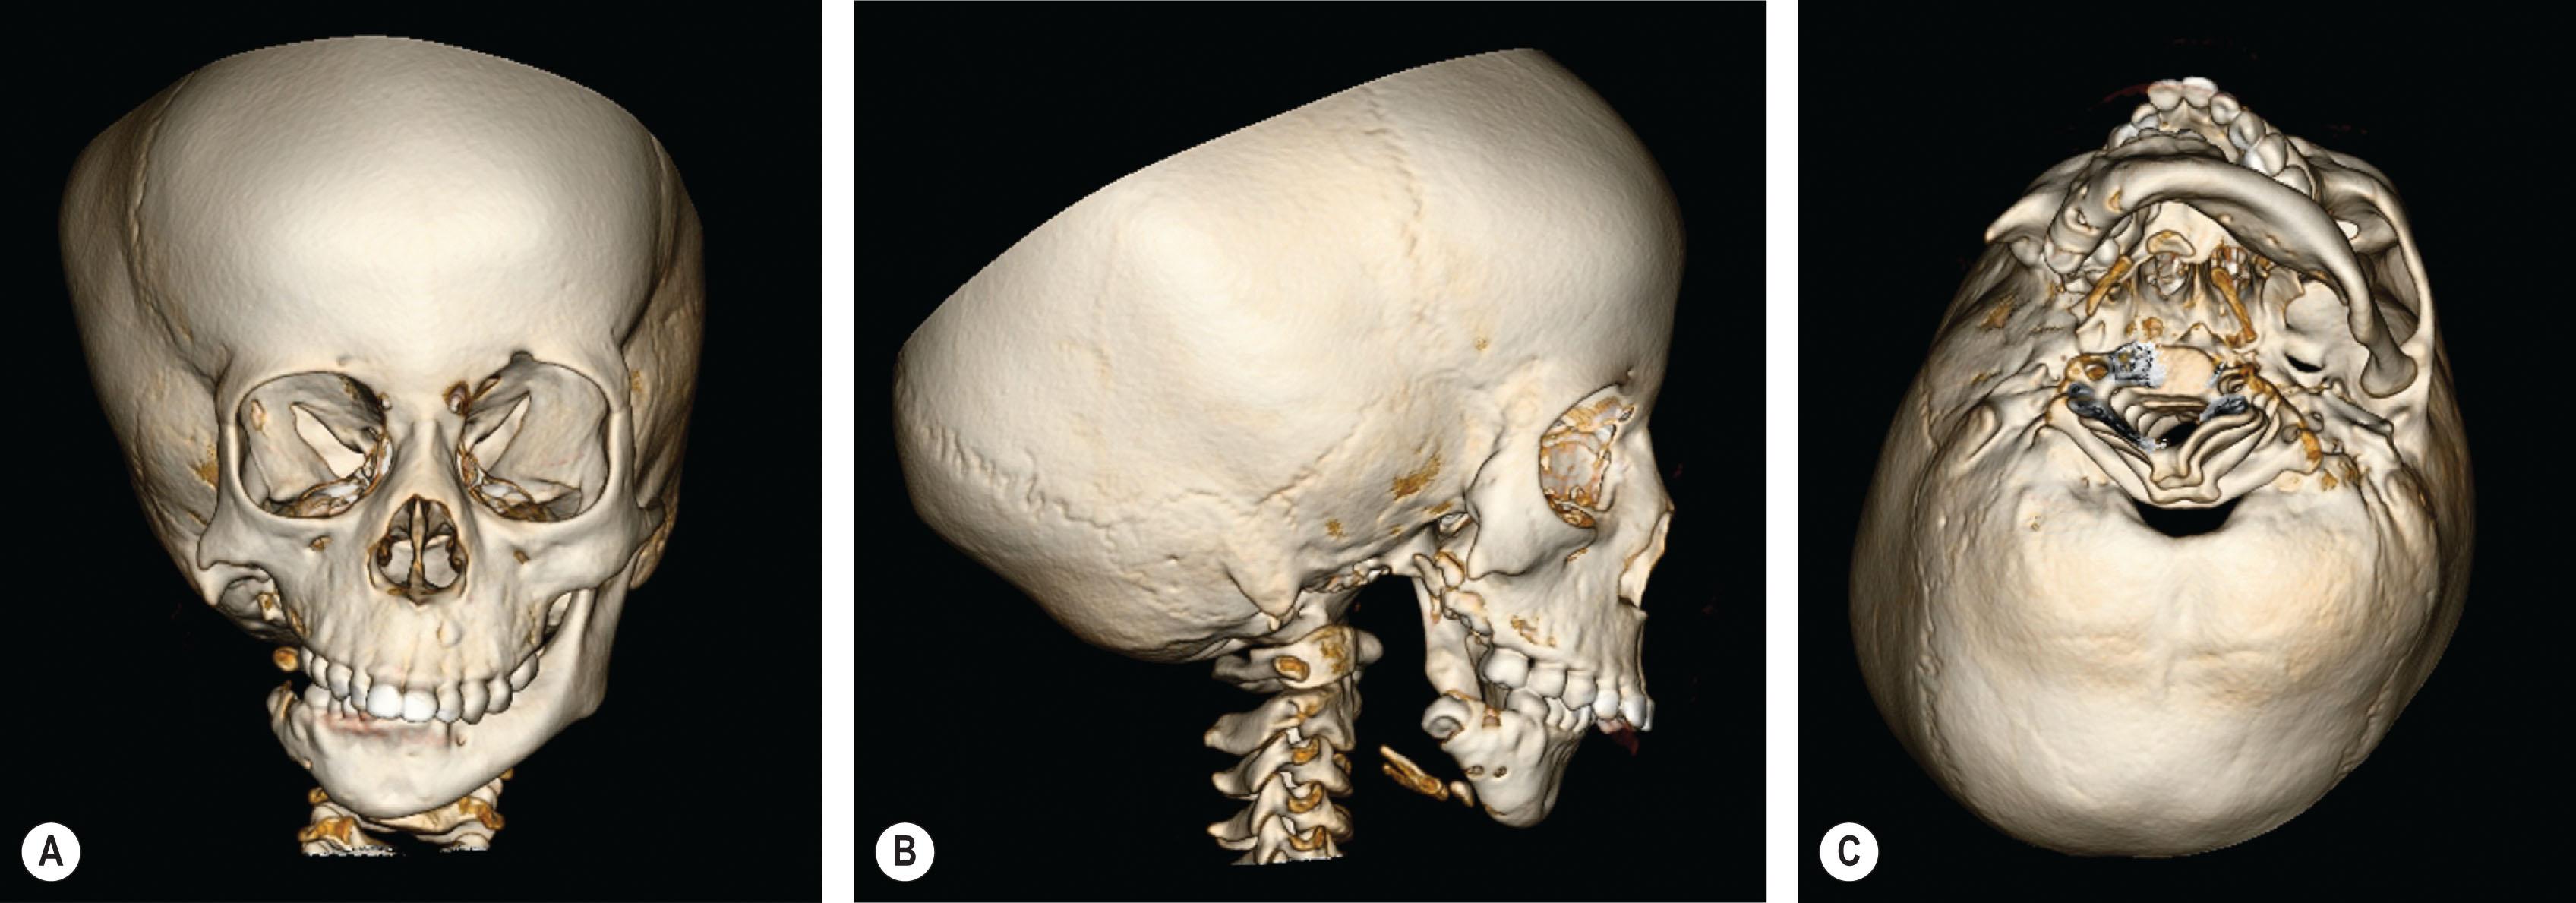 Figure 26.3, 3D maxillofacial CT scan of a patient with CFM displaying a severe right mandibular deformity that includes an absent ramus and condyle as well as a smaller body compared to the contralateral side. Note the absent zygomatic arch and glenoid fossa. (A) Anteroposterior (AP) view. (B) Right lateral view. (C) Worm's eye view.